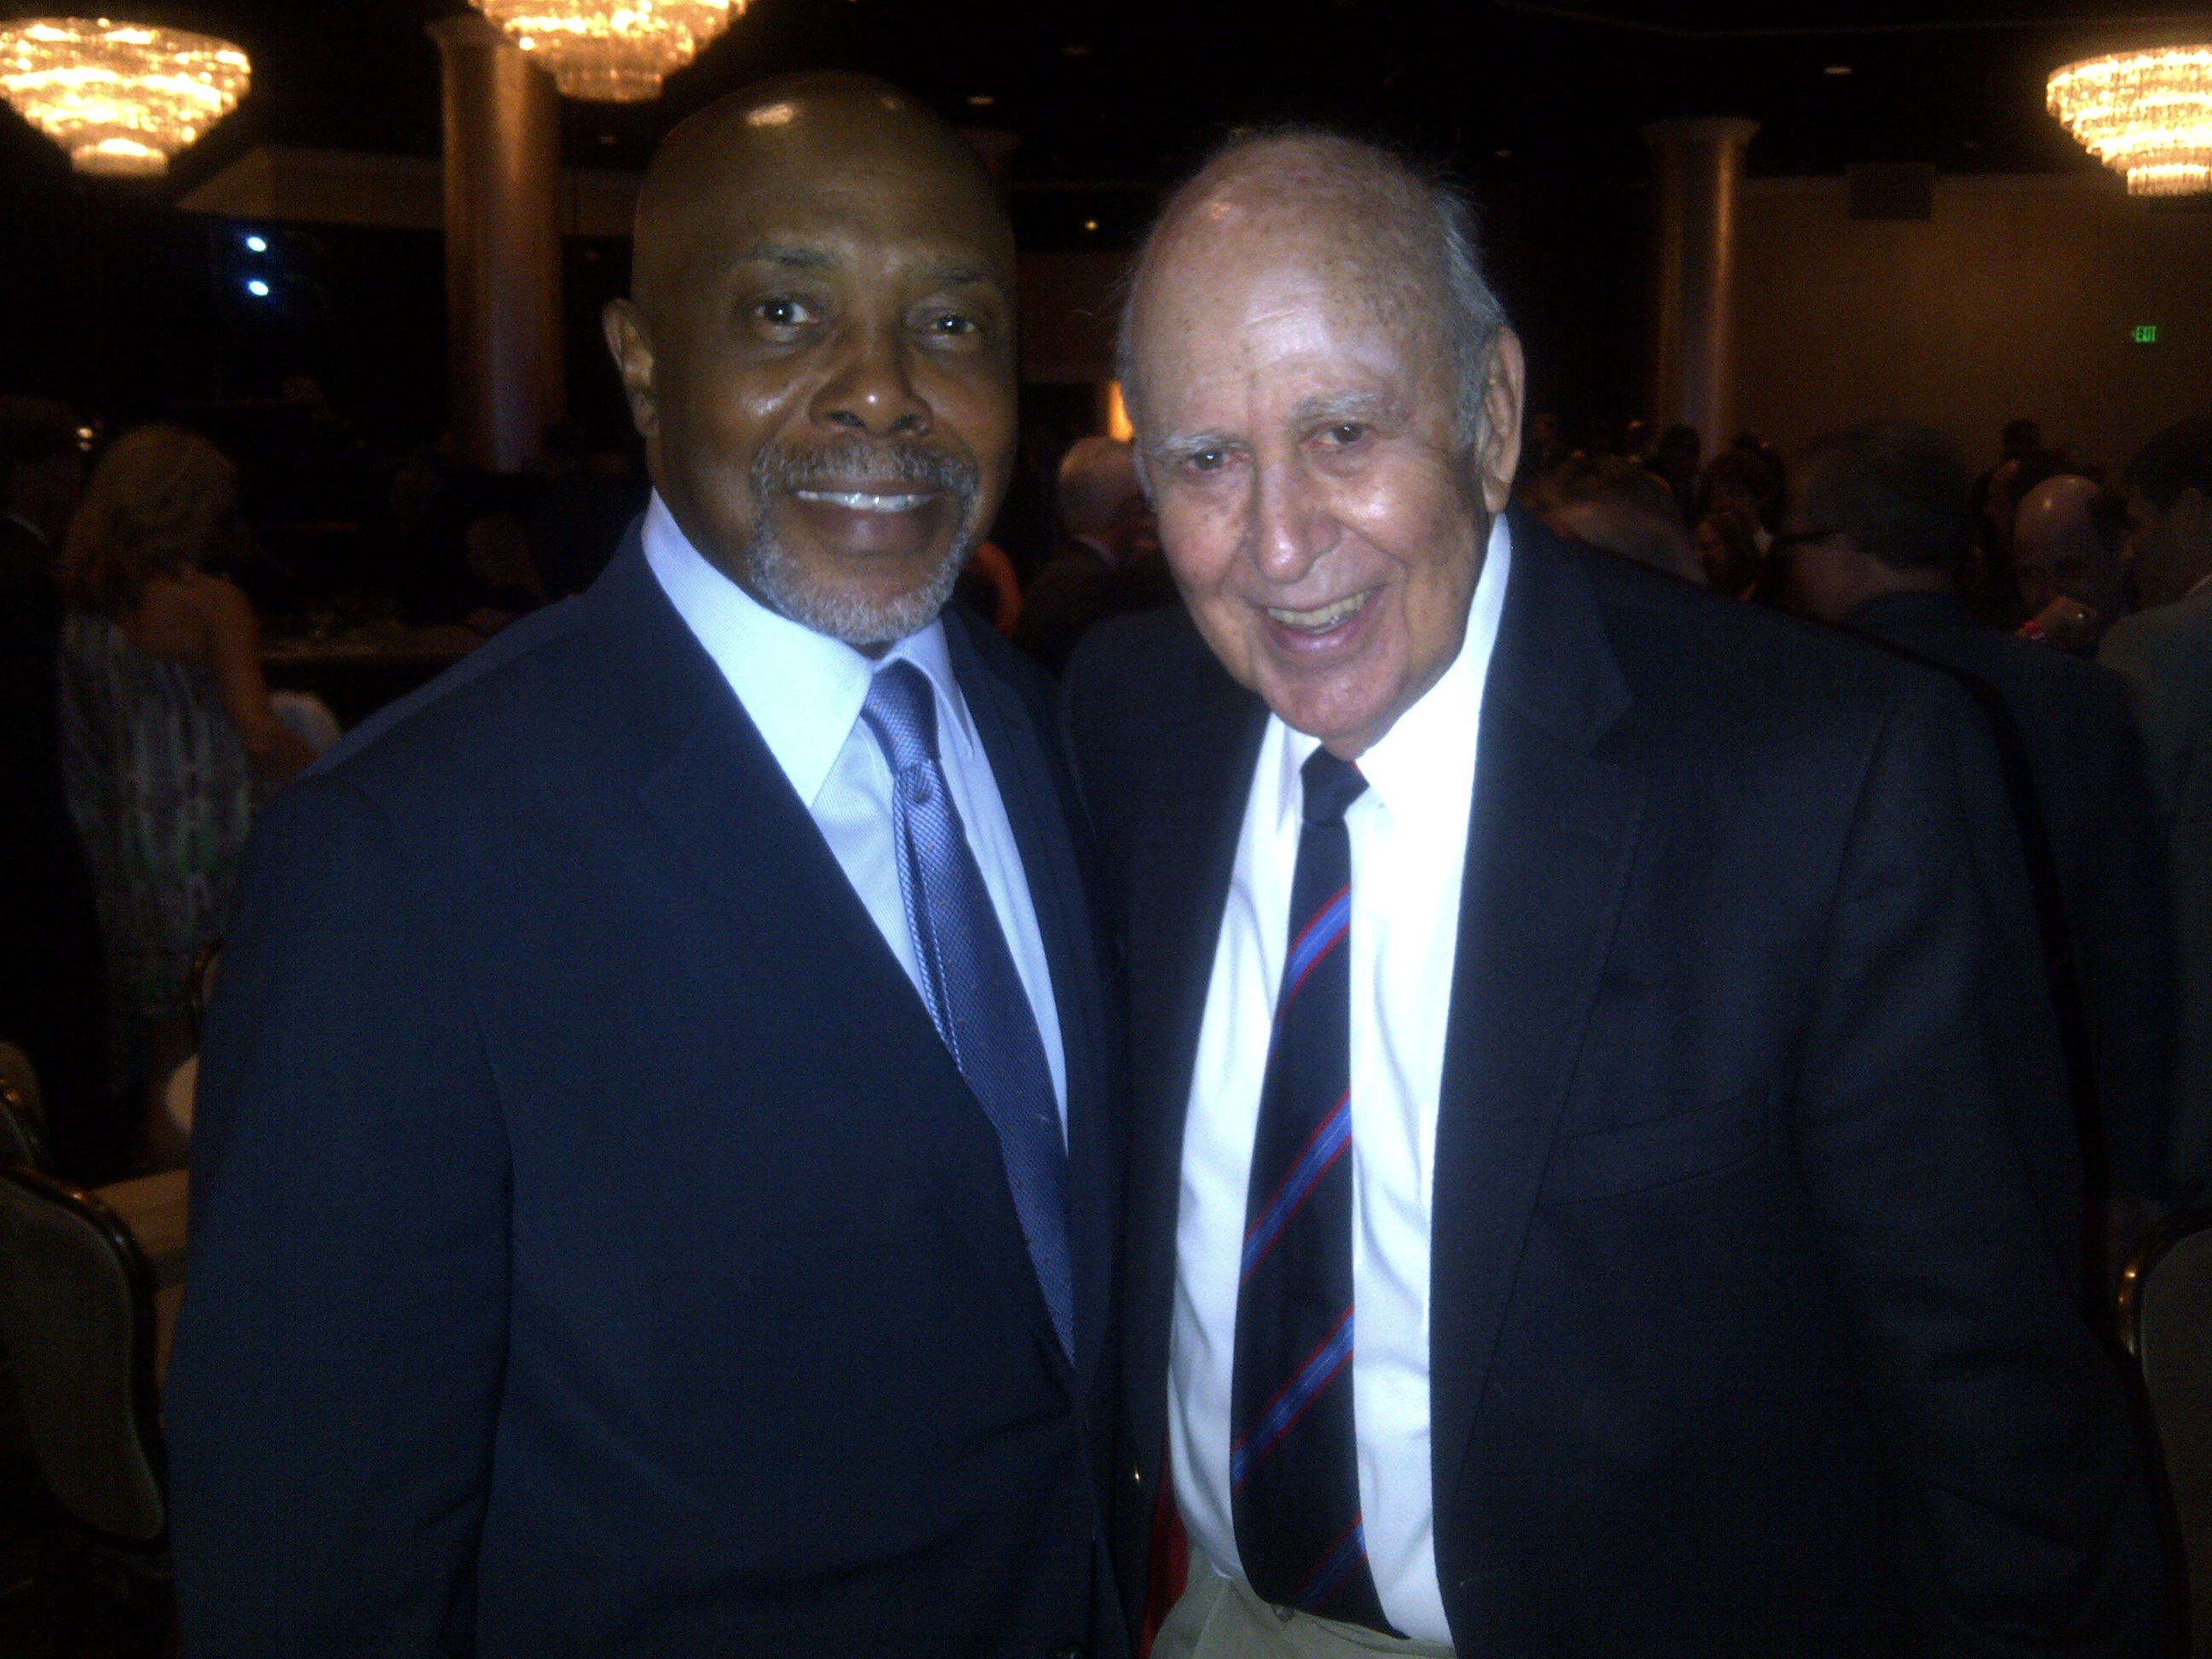 Roscoe Orman and Carl Reiner